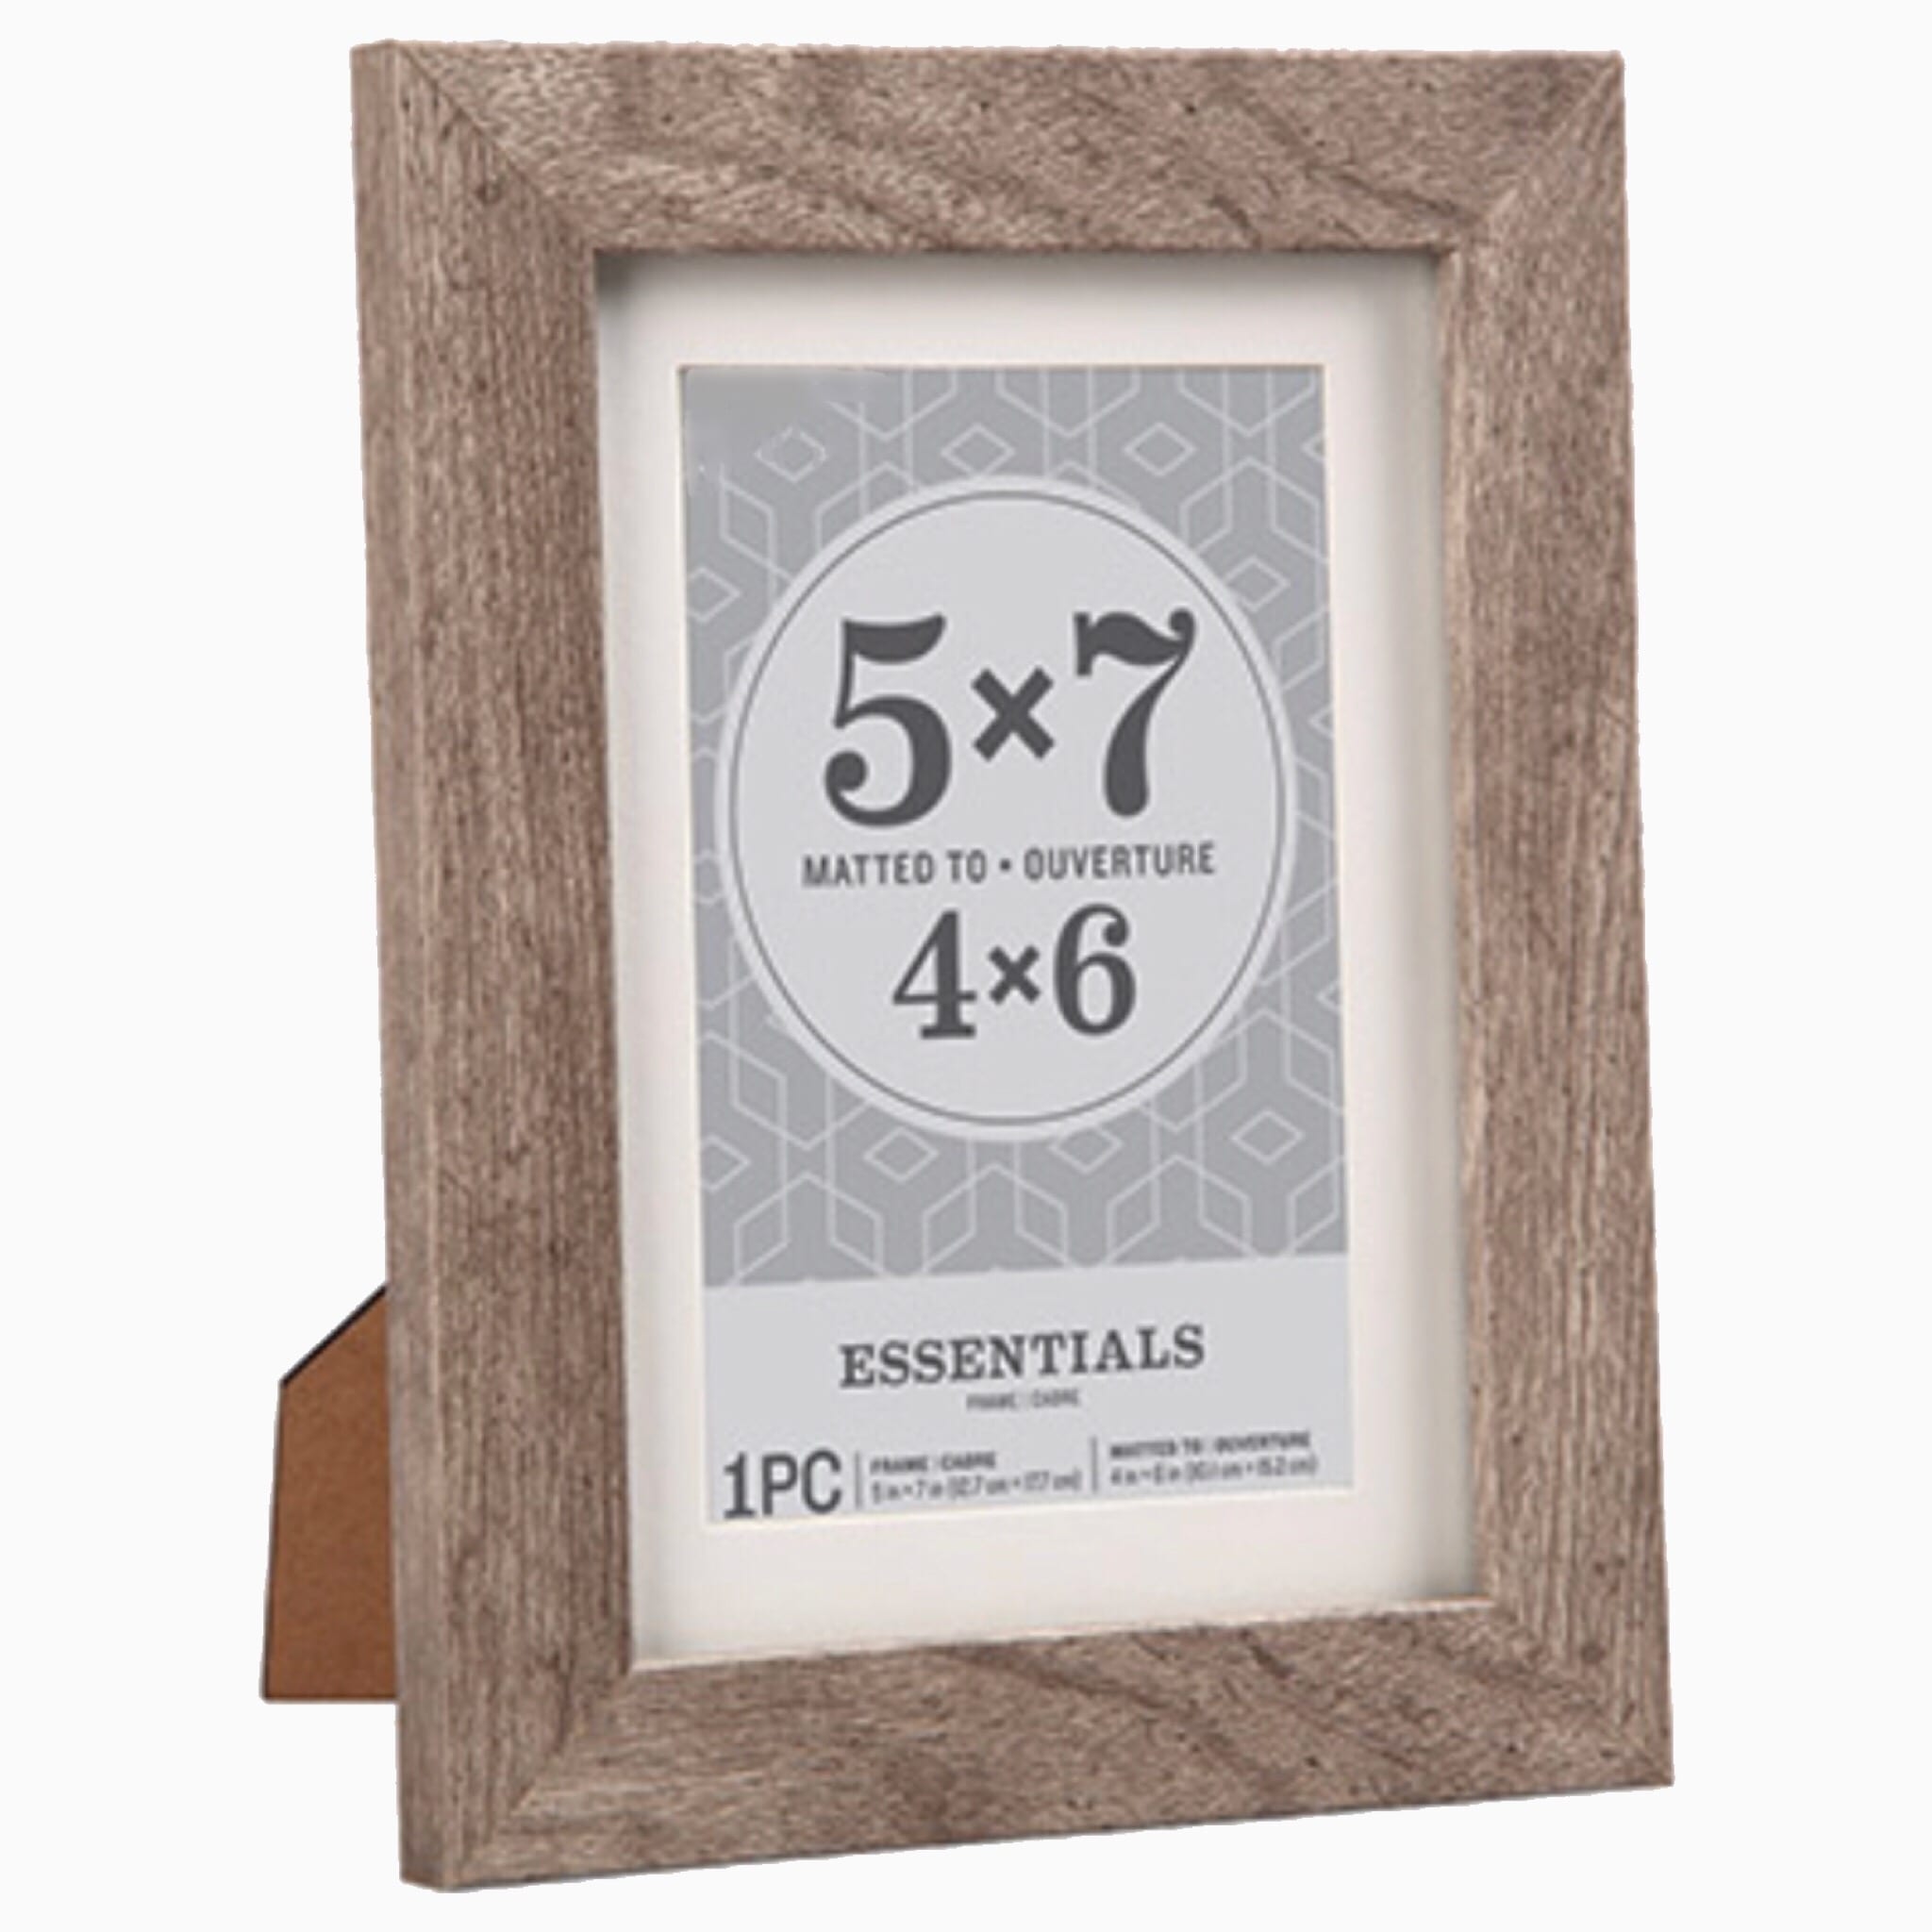 5 x 7 Matted Rustic Frame - Louisiana Gifts and Gallery, Inc.